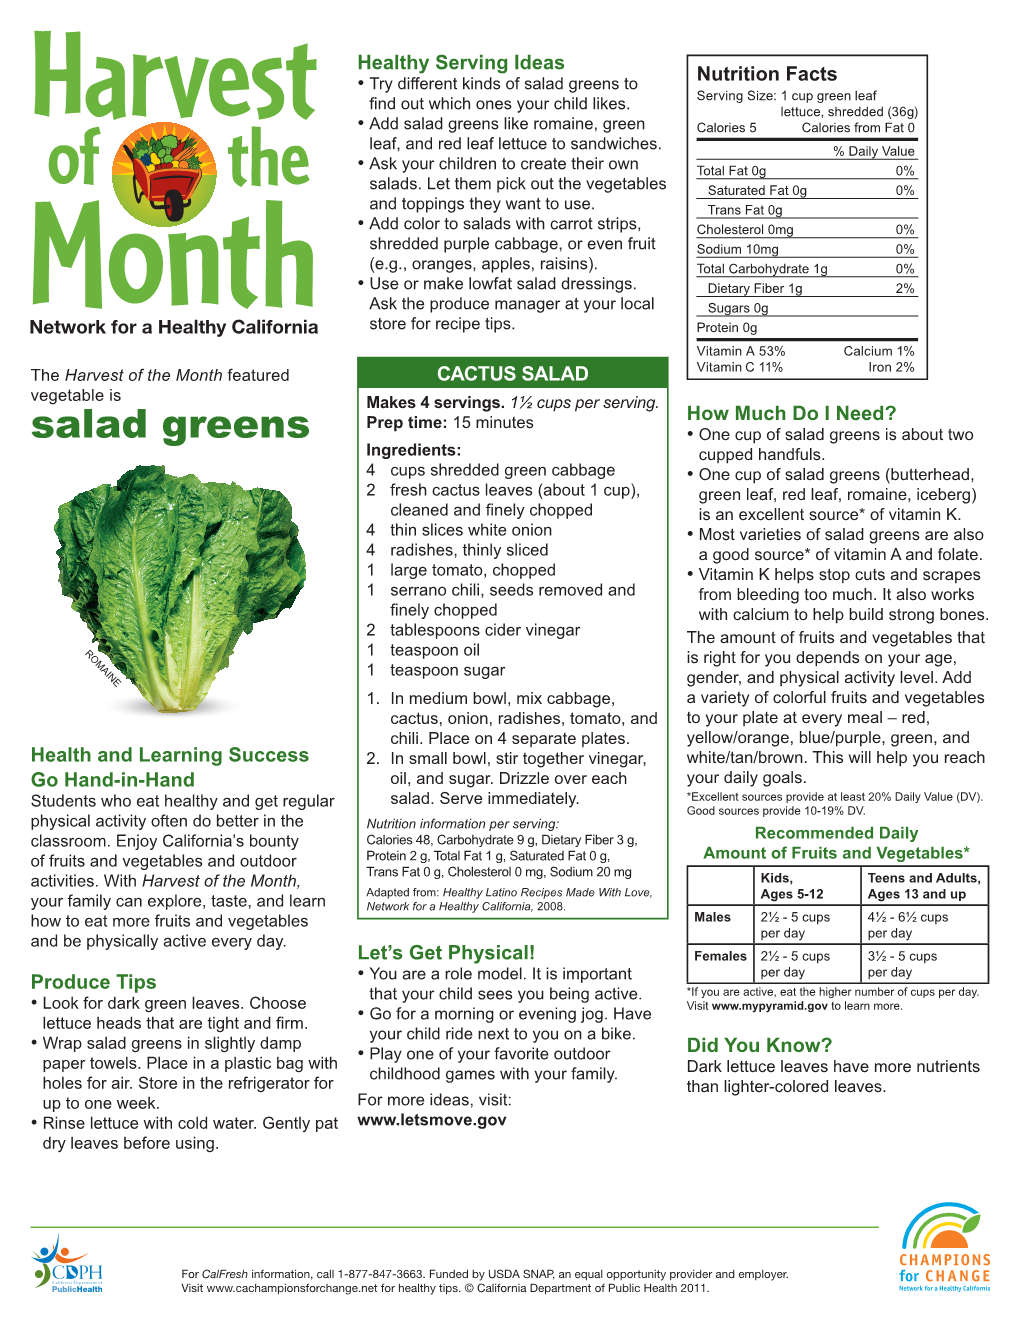 Salad Greens to Nutrition Facts Serving Size: 1 Cup Green Leaf Find out Which Ones Your Child Likes